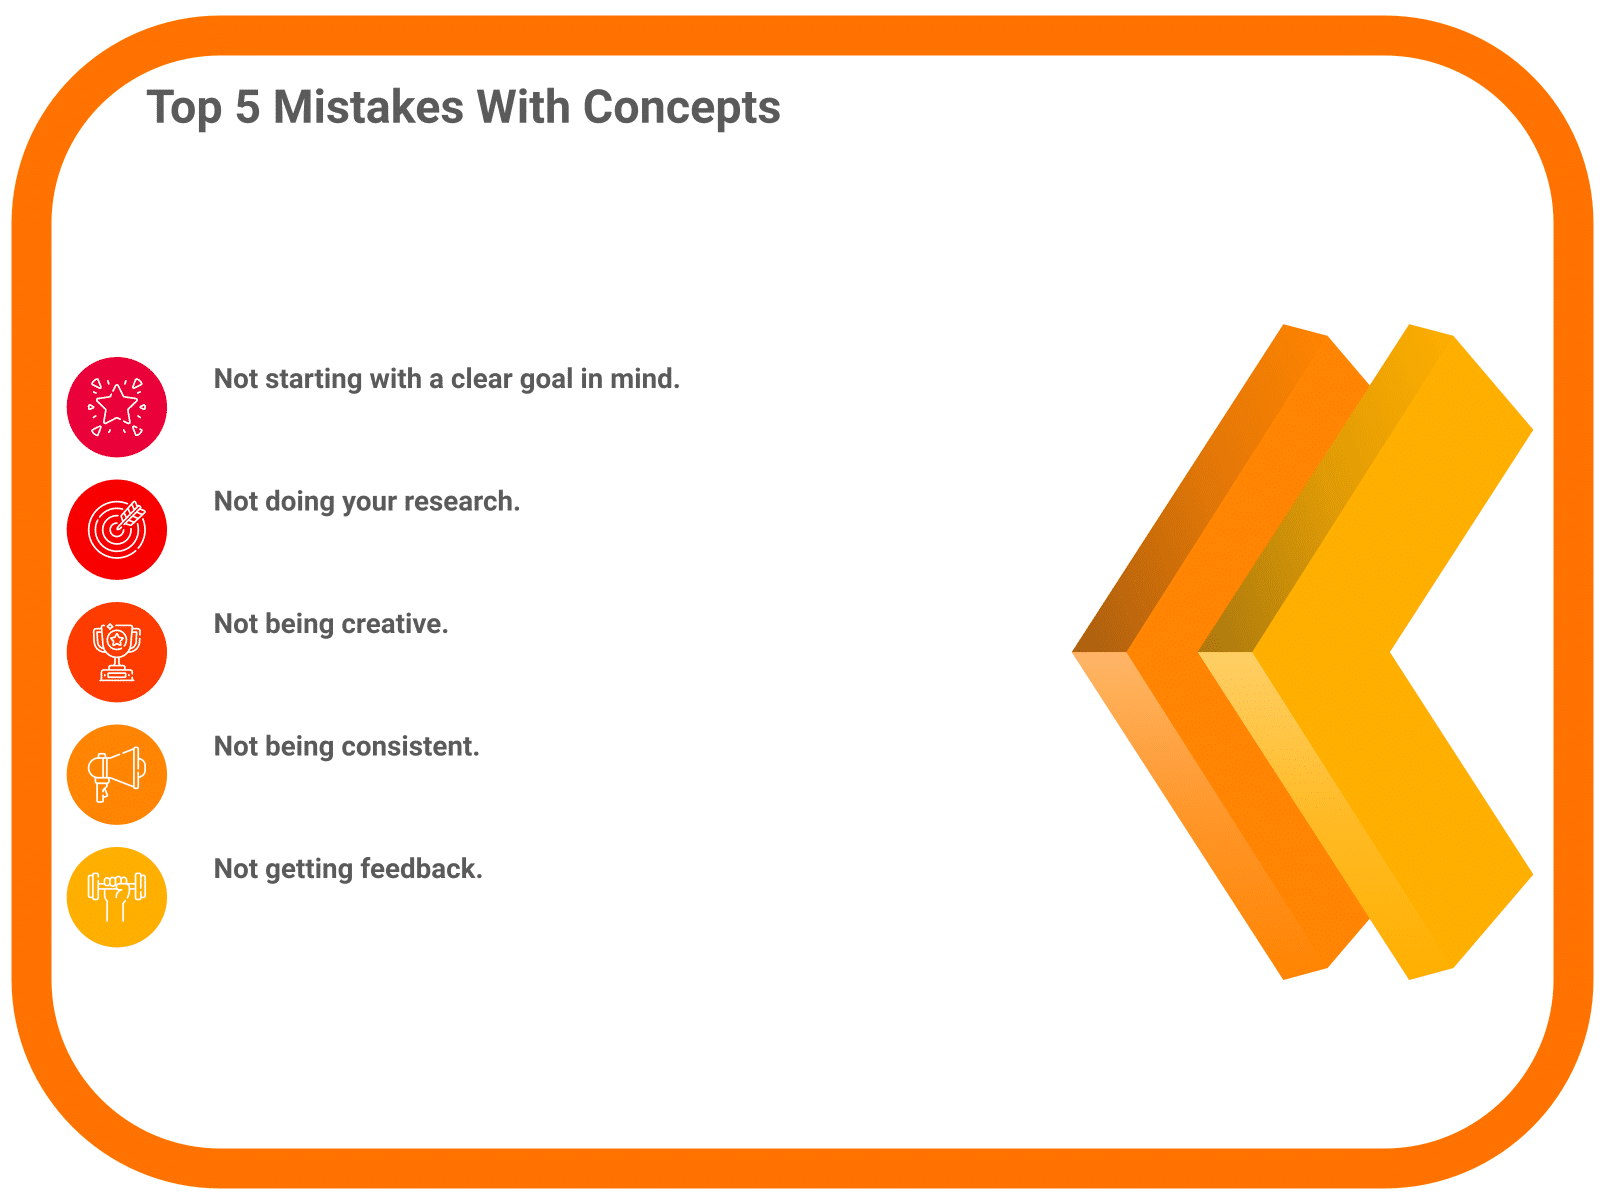 Top 5 Mistakes With Concepts